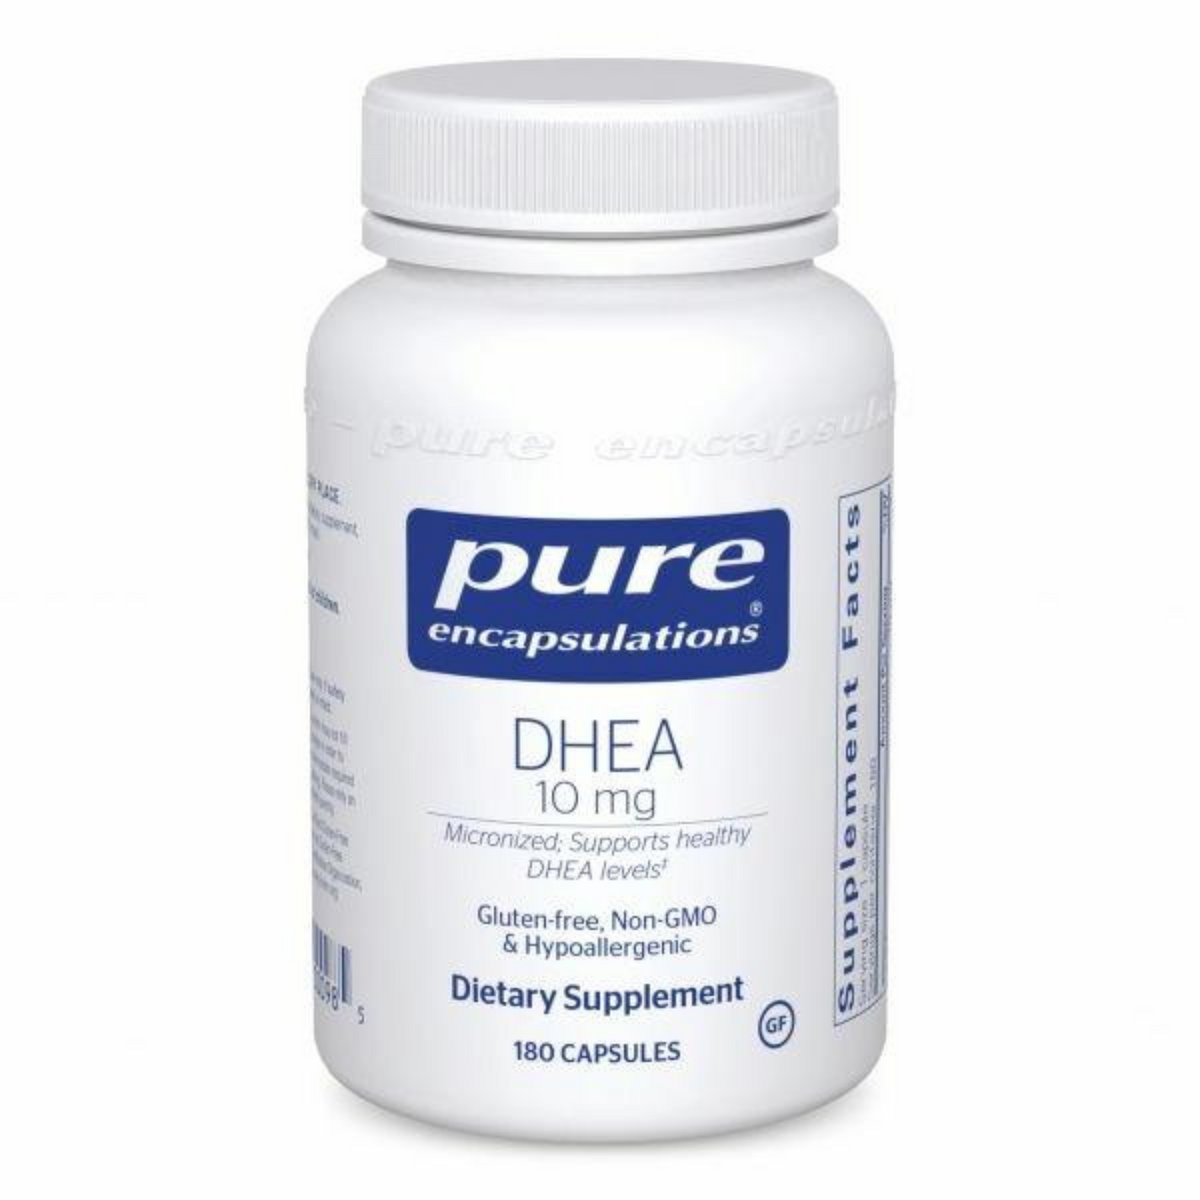 Primary Image of DHEA 10 mg. Capsules (180 count)